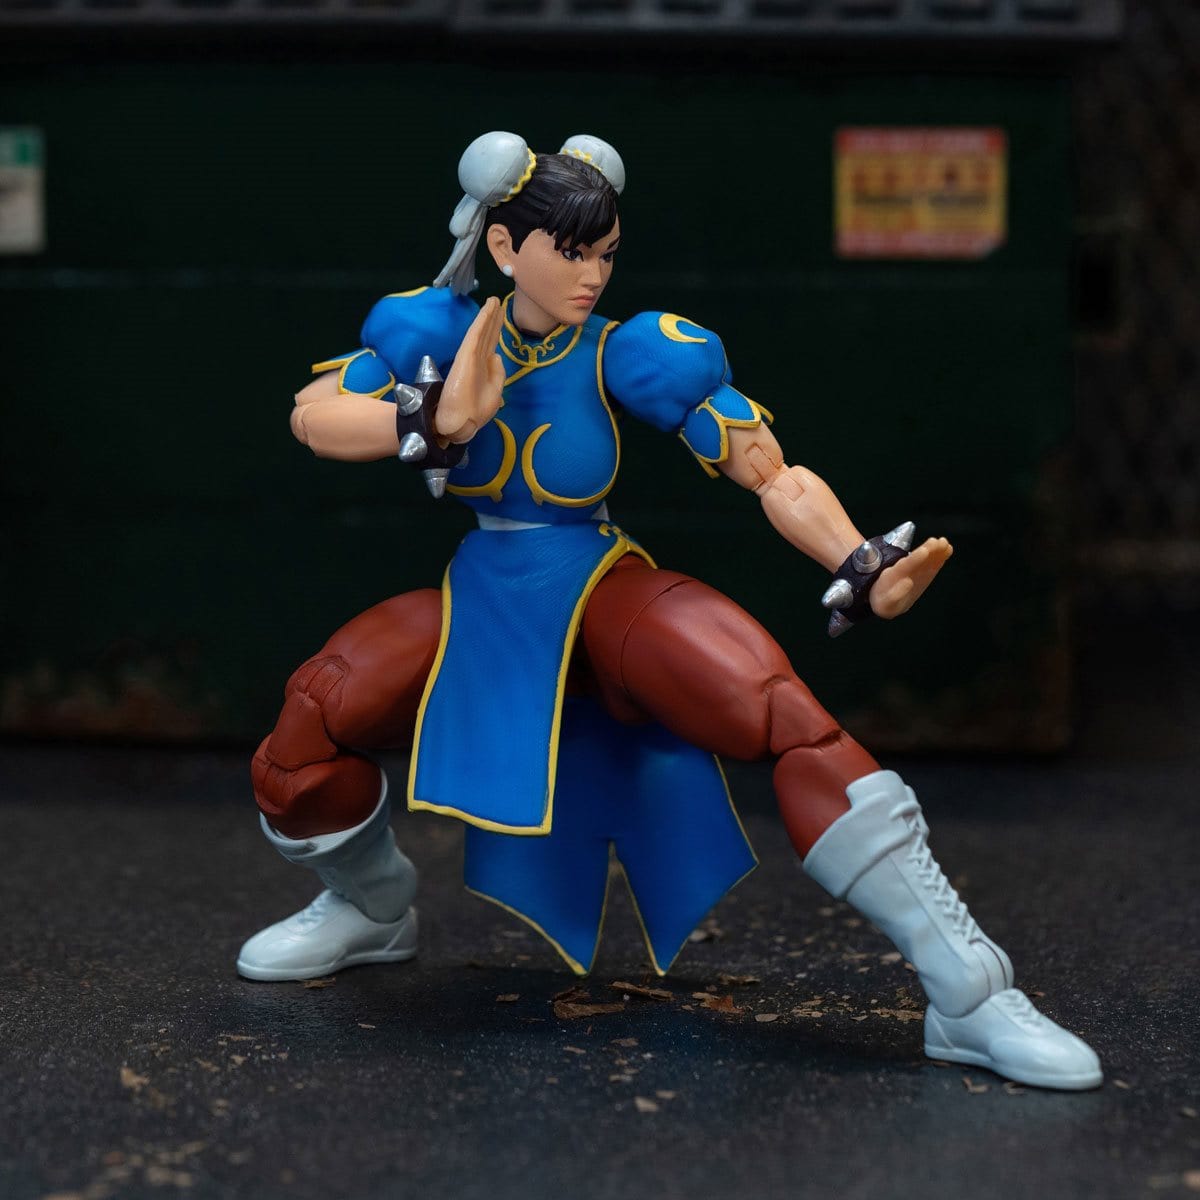 Ultra-Street-Fighter-II-Chun-Li6-Inch-Scale-Action-Figure-toys-pose-collectible-fight.